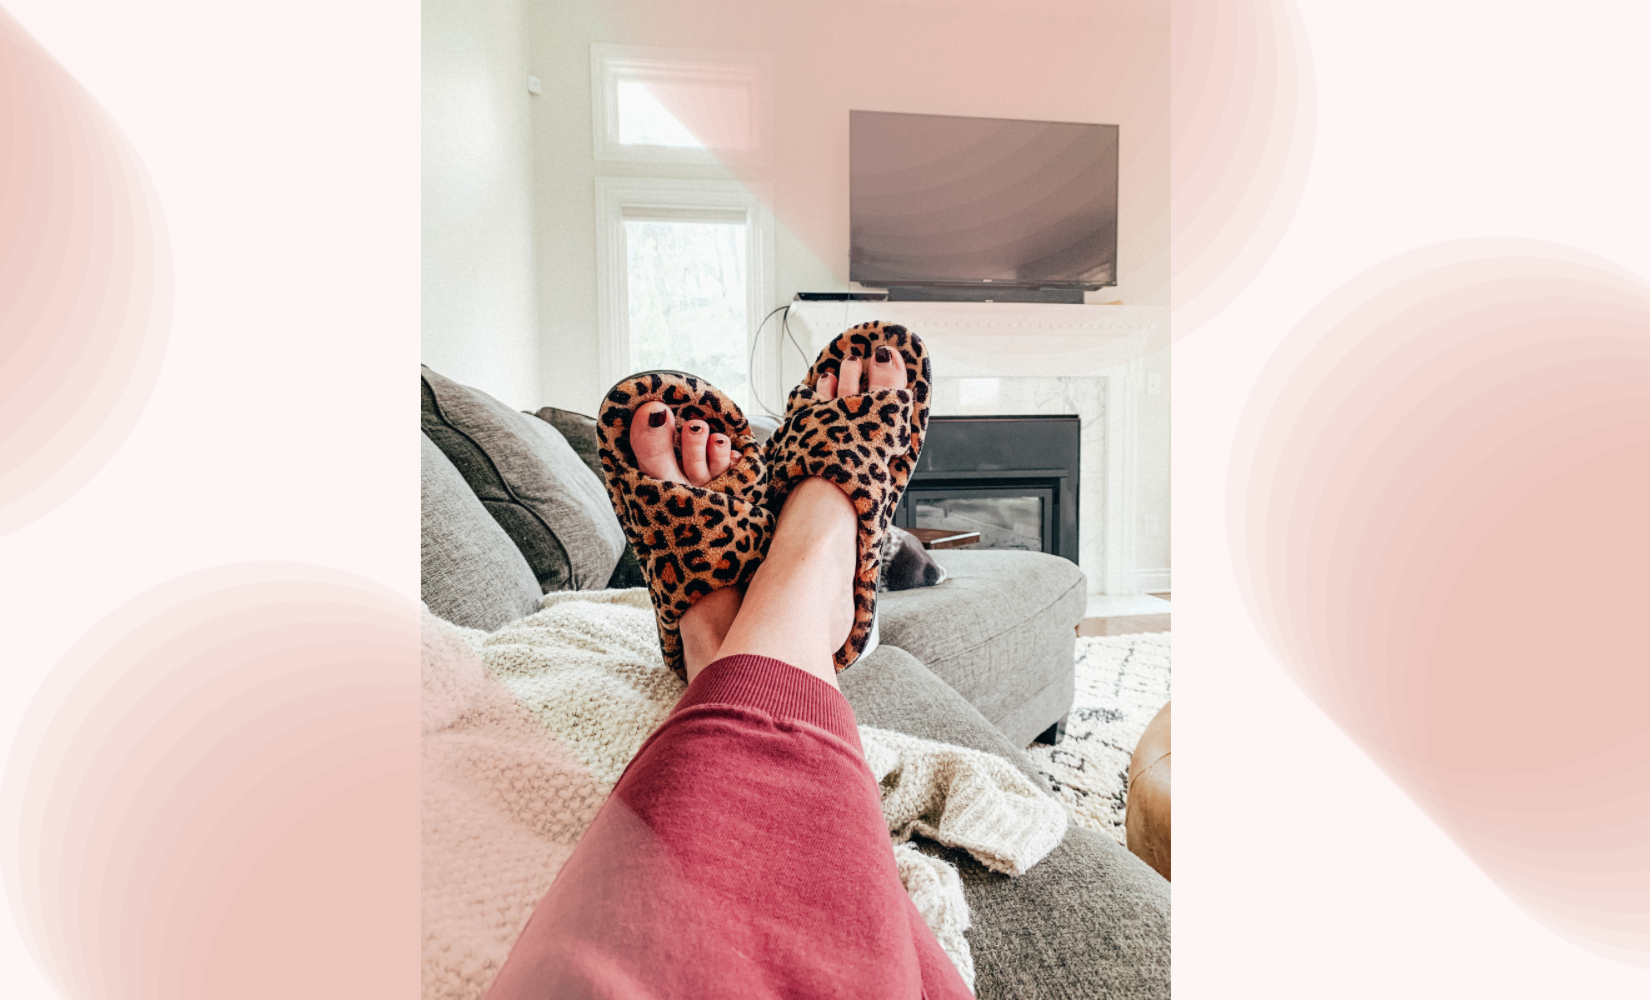 Vionic Slippers for Women: Cozy, Cute, and WFH Mom Approved